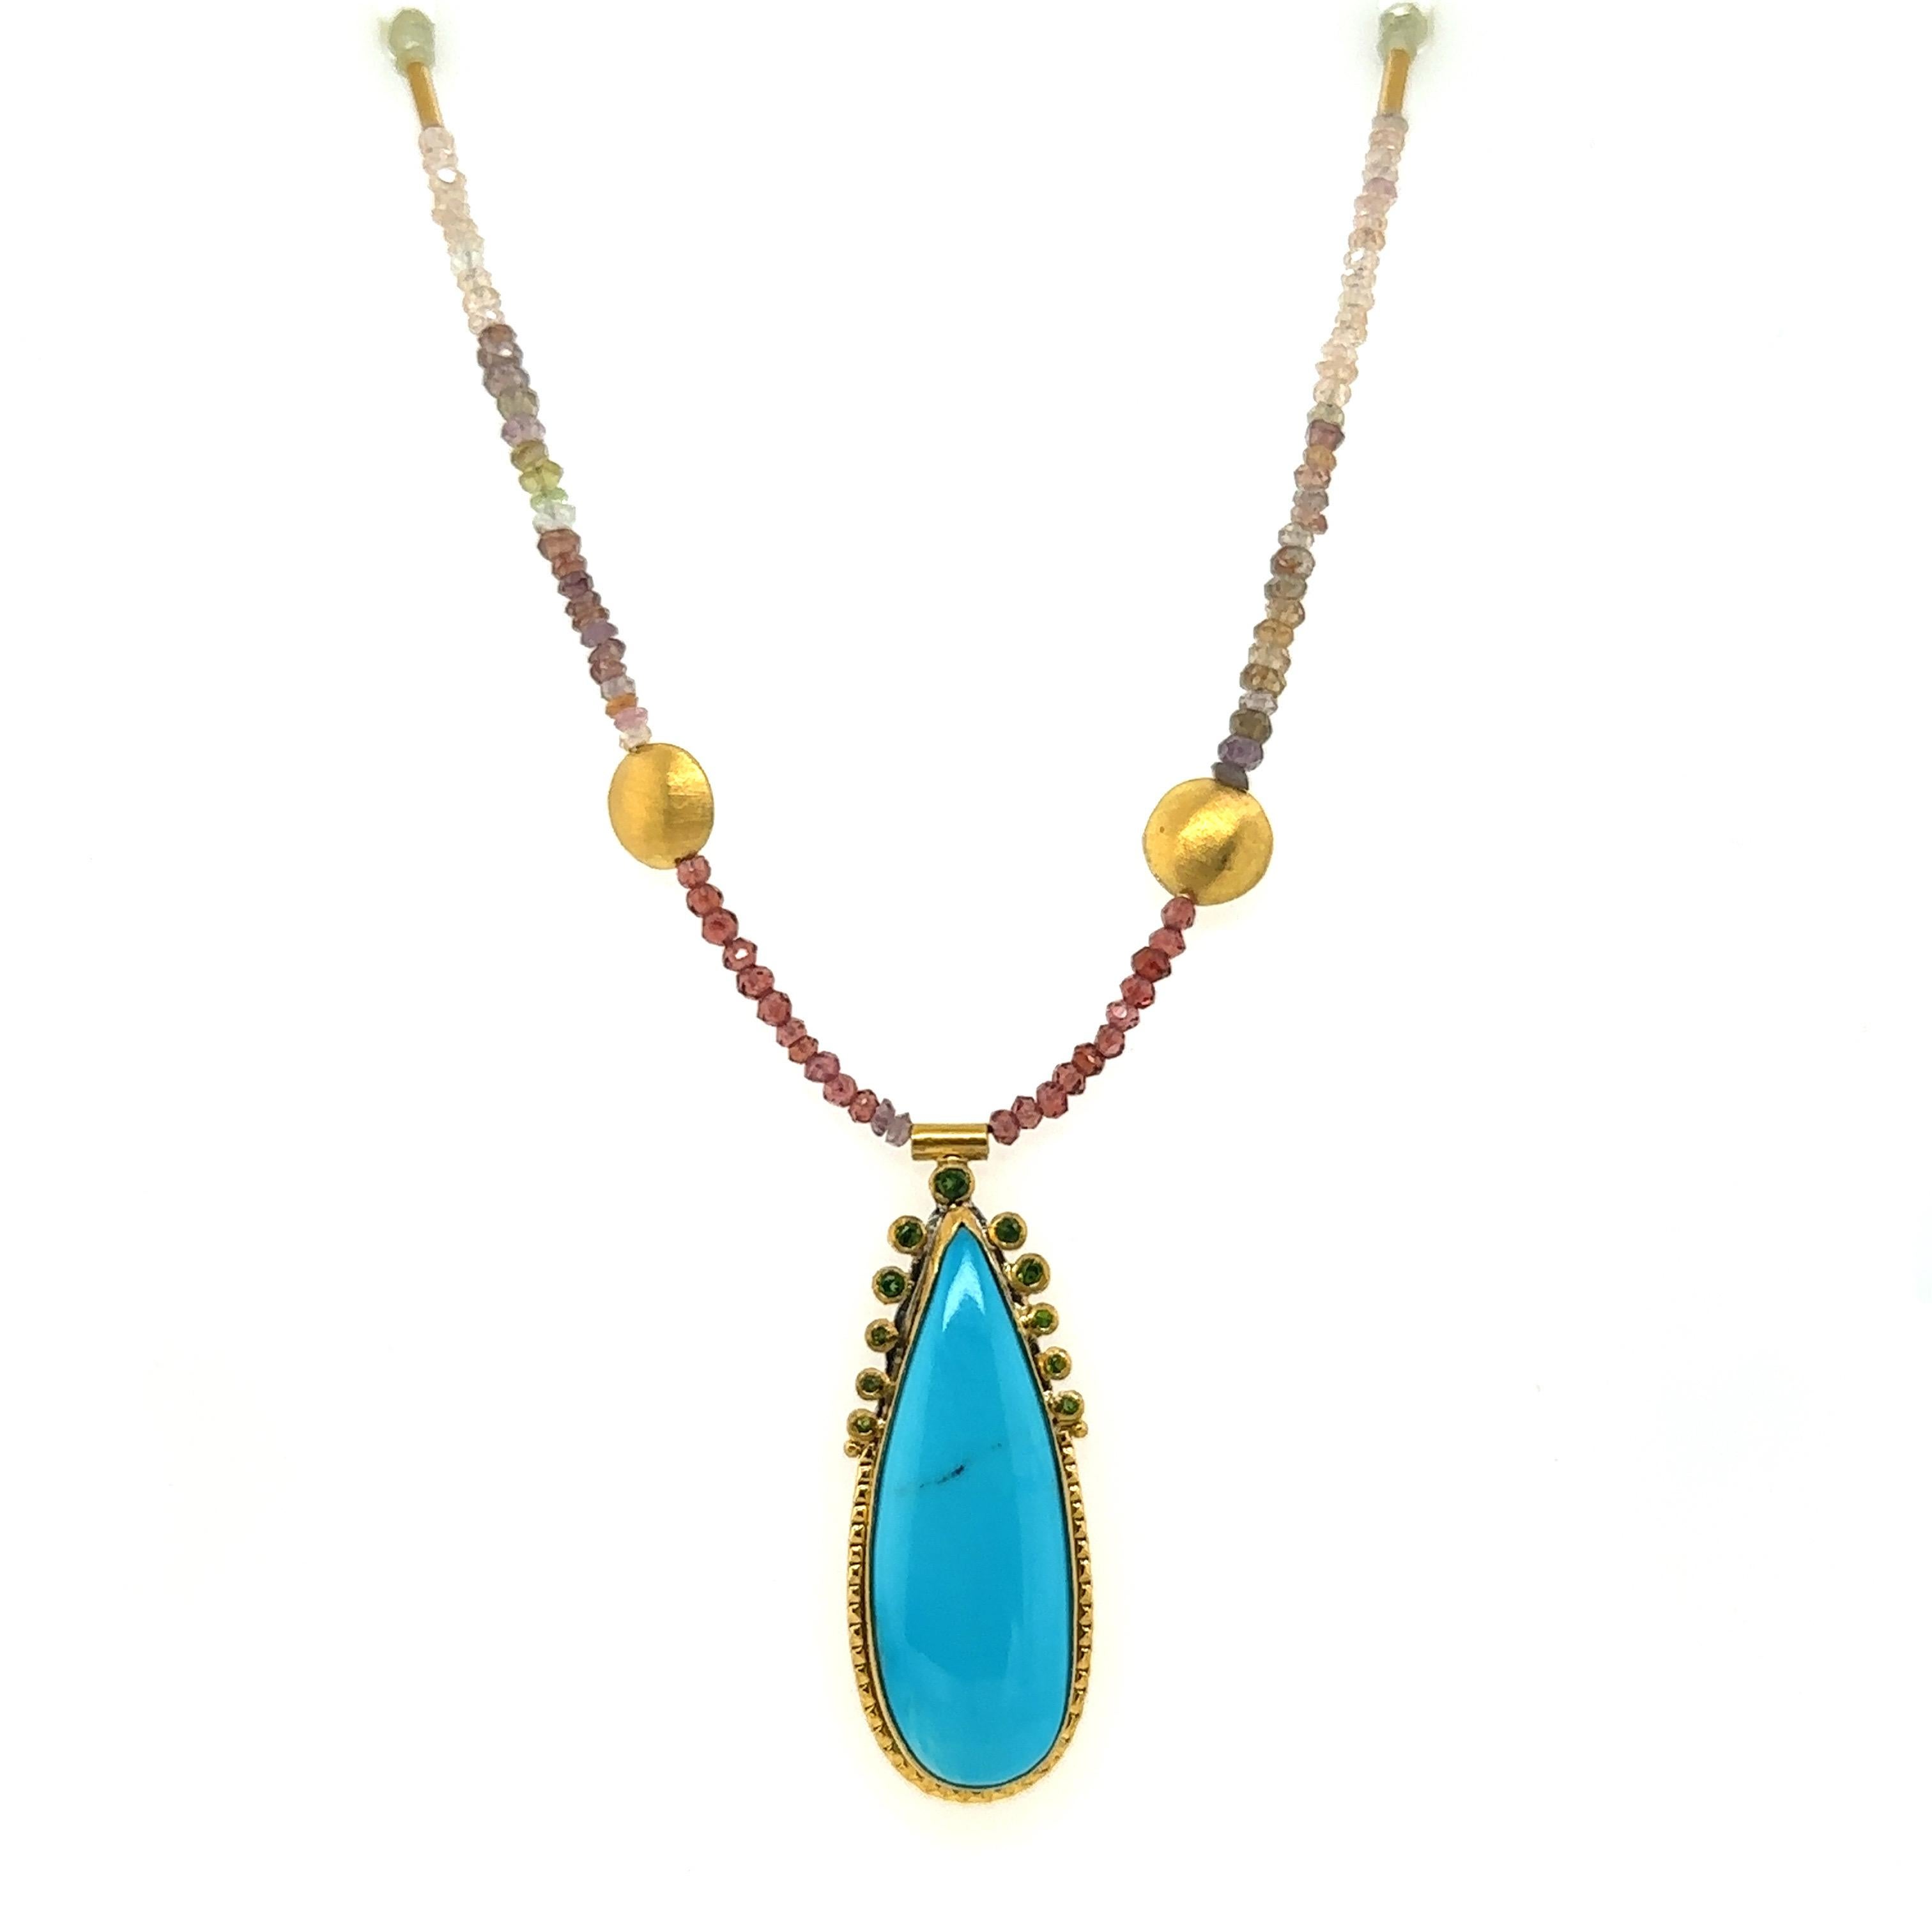 JAS-19-1845 - 24K GOLD/STERLING SILVER w KINGMAN TURQUOISE & MULTI COLOR BEADS For Sale 6